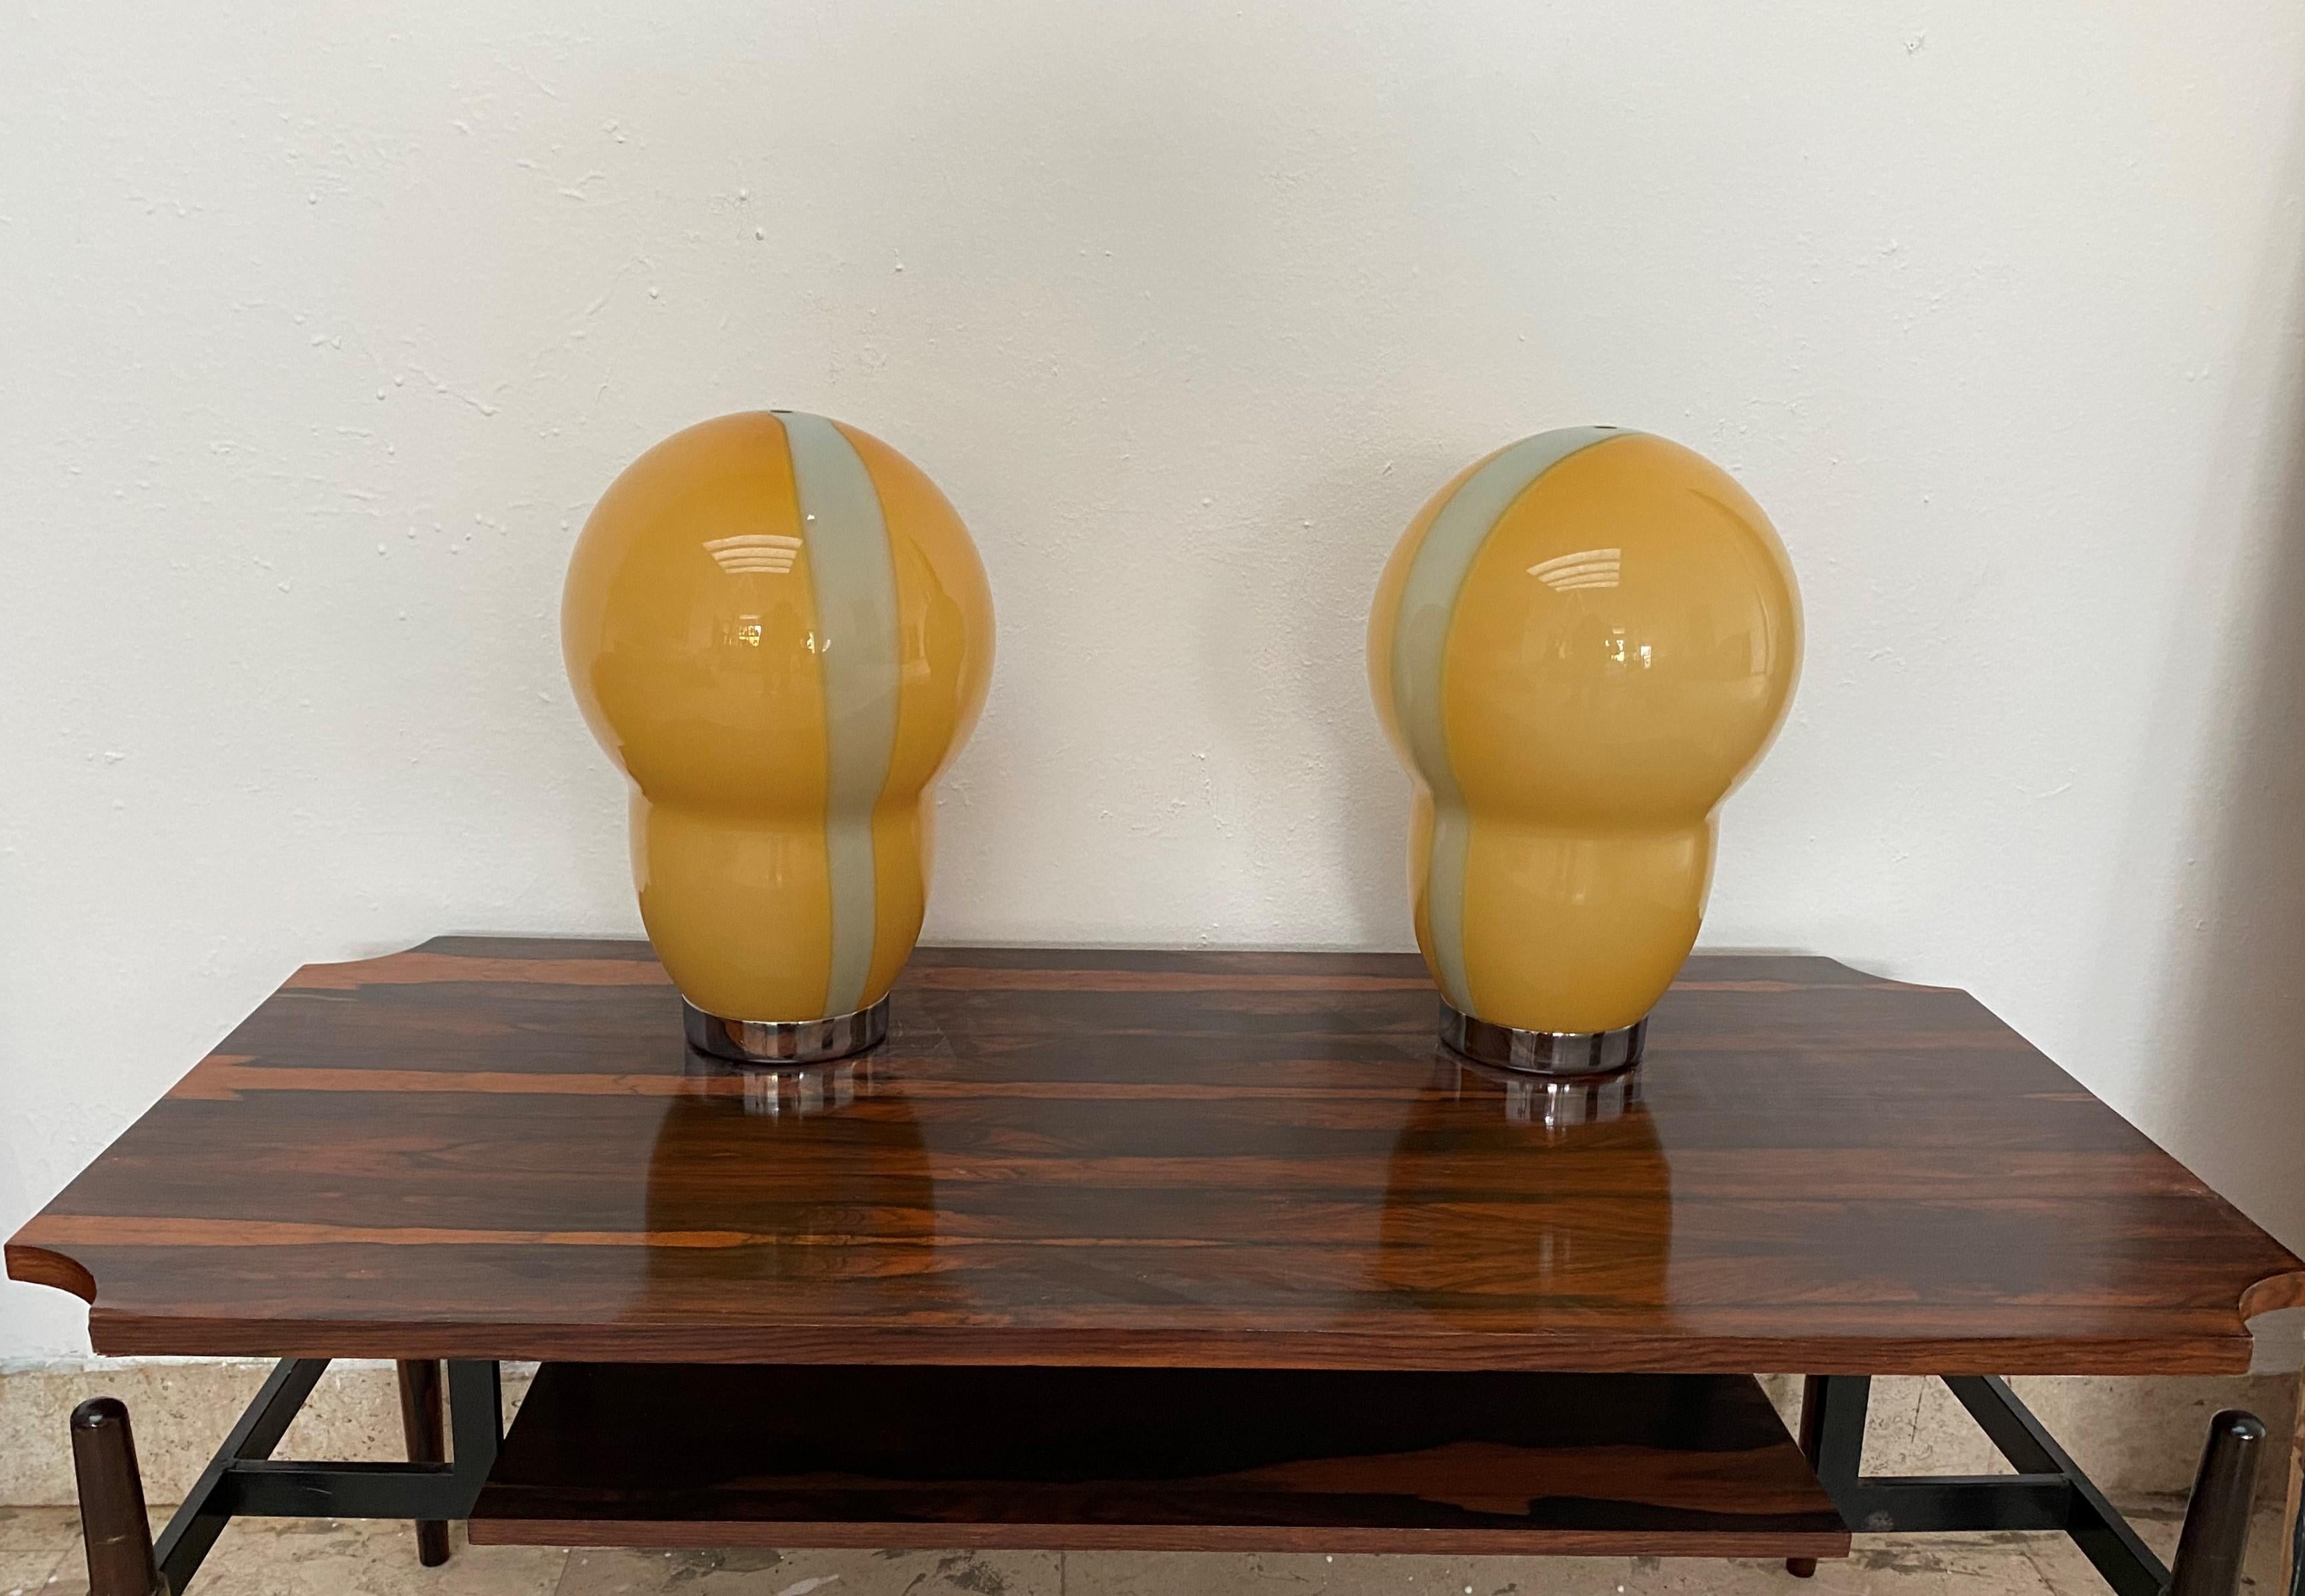 Beautiful  table lamps in orange and green hand-blown Murano glass.
Designed by Ettore Sottsass for Venini and manufactured in 1994.
The glass shade is signed 